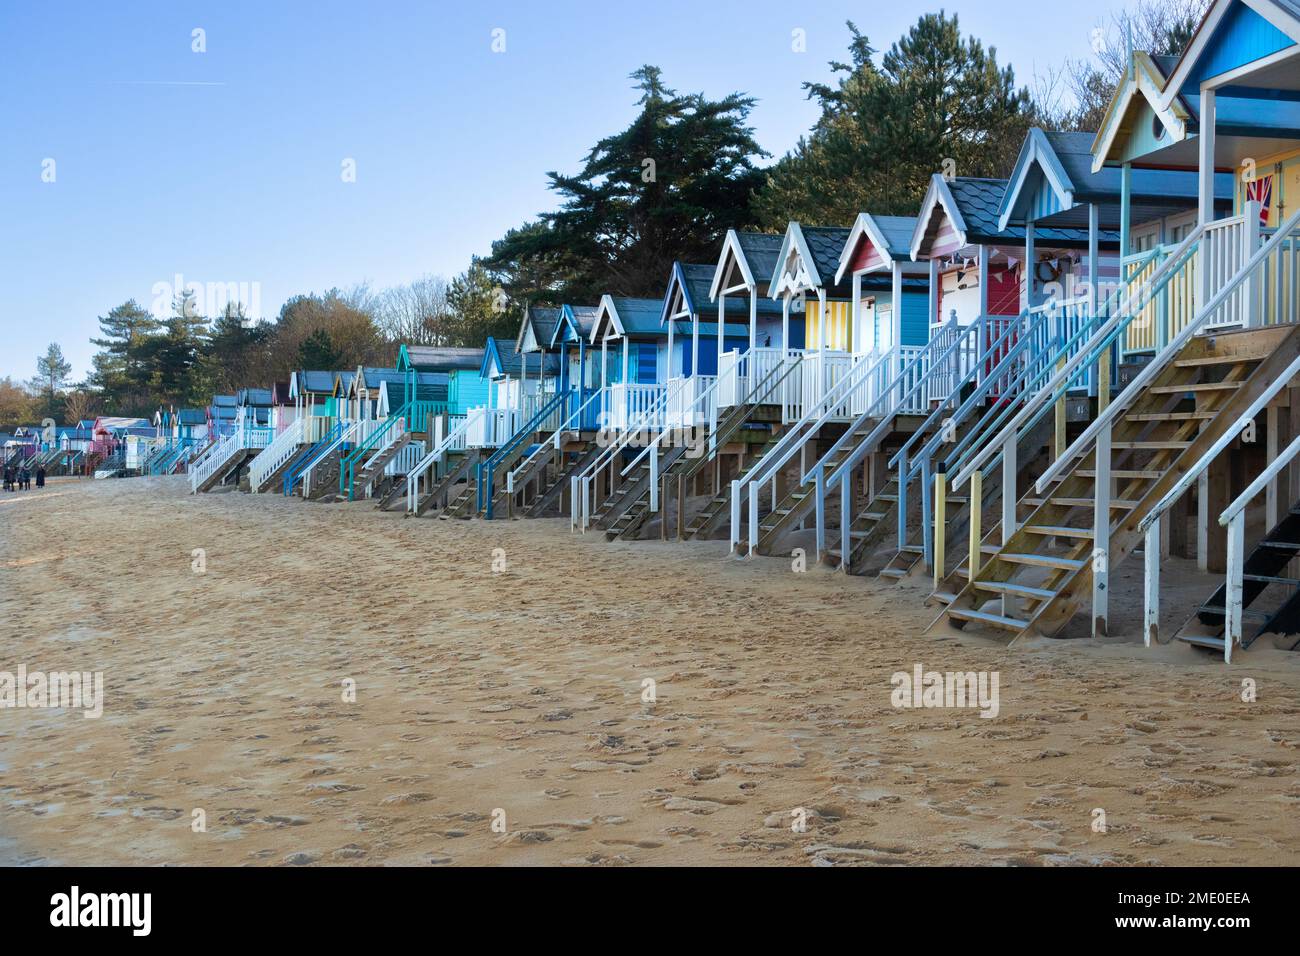 Line of beach huts at Wells on Sea North Norfolk in winter, England Stock Photo